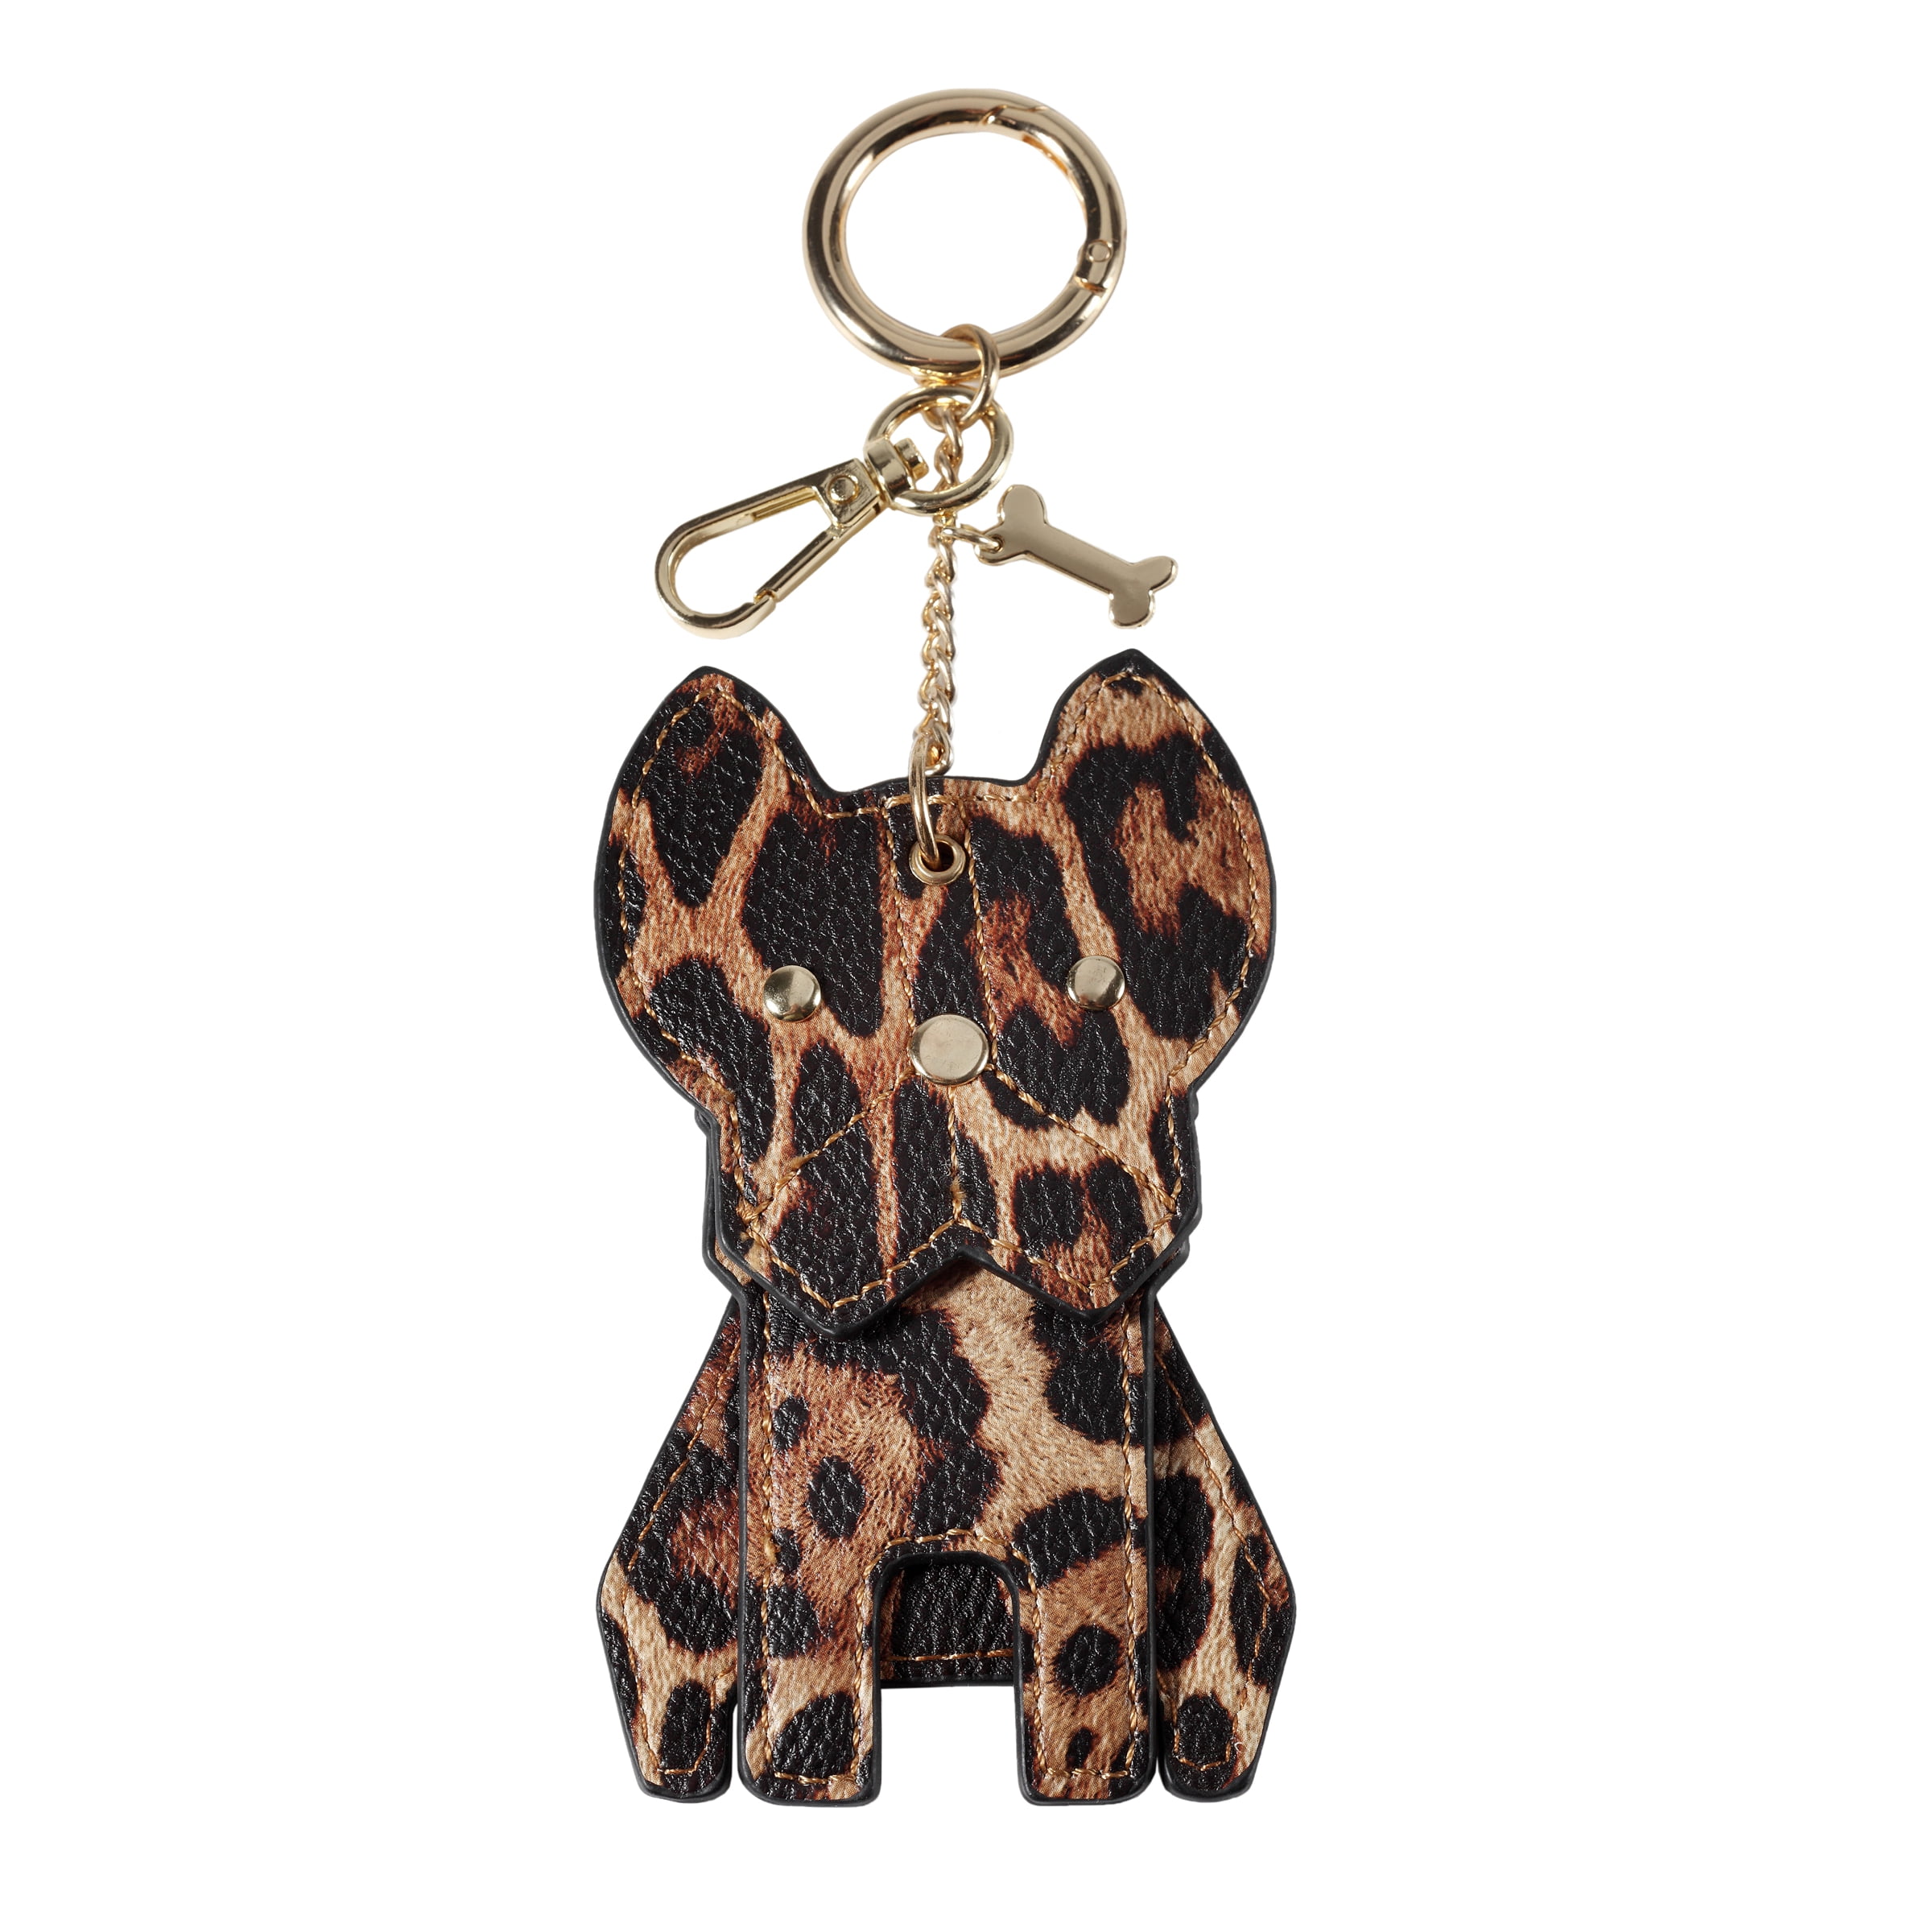 Daisy Rose Dog Keychain with Clasp and Key FOB Ring - PU Vegan Leather Small Decoration for Handbags and Backpacks - Leopard